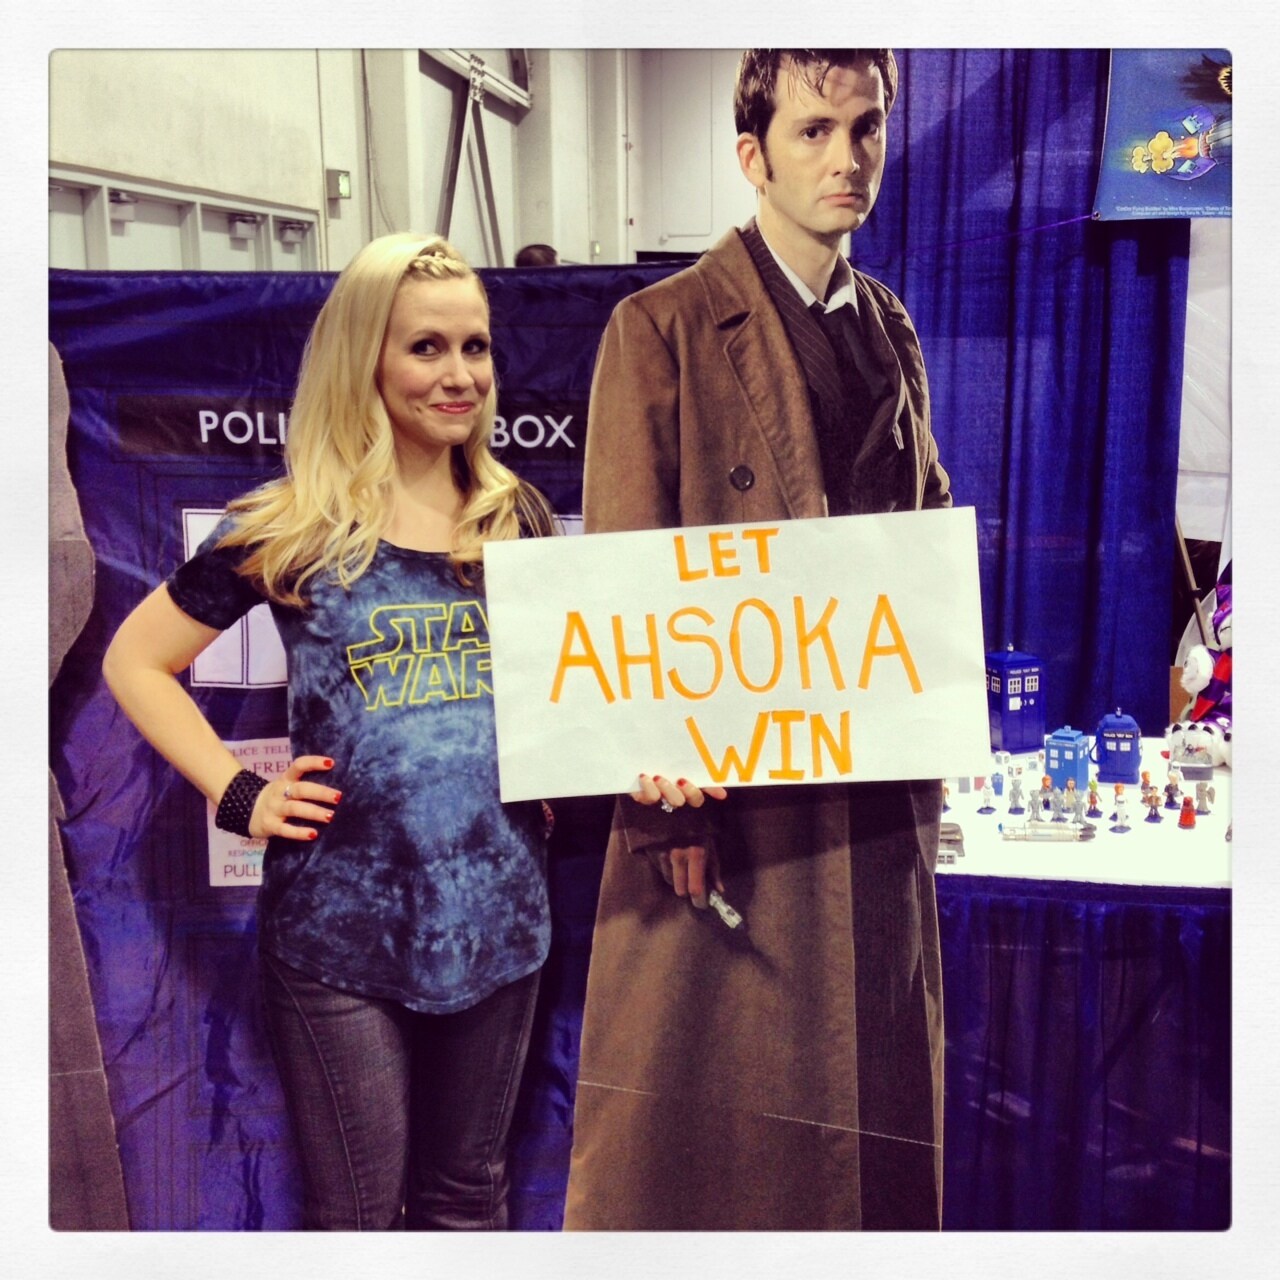 David Tennant is NOT Amused by the thought of Ahsoka losing!